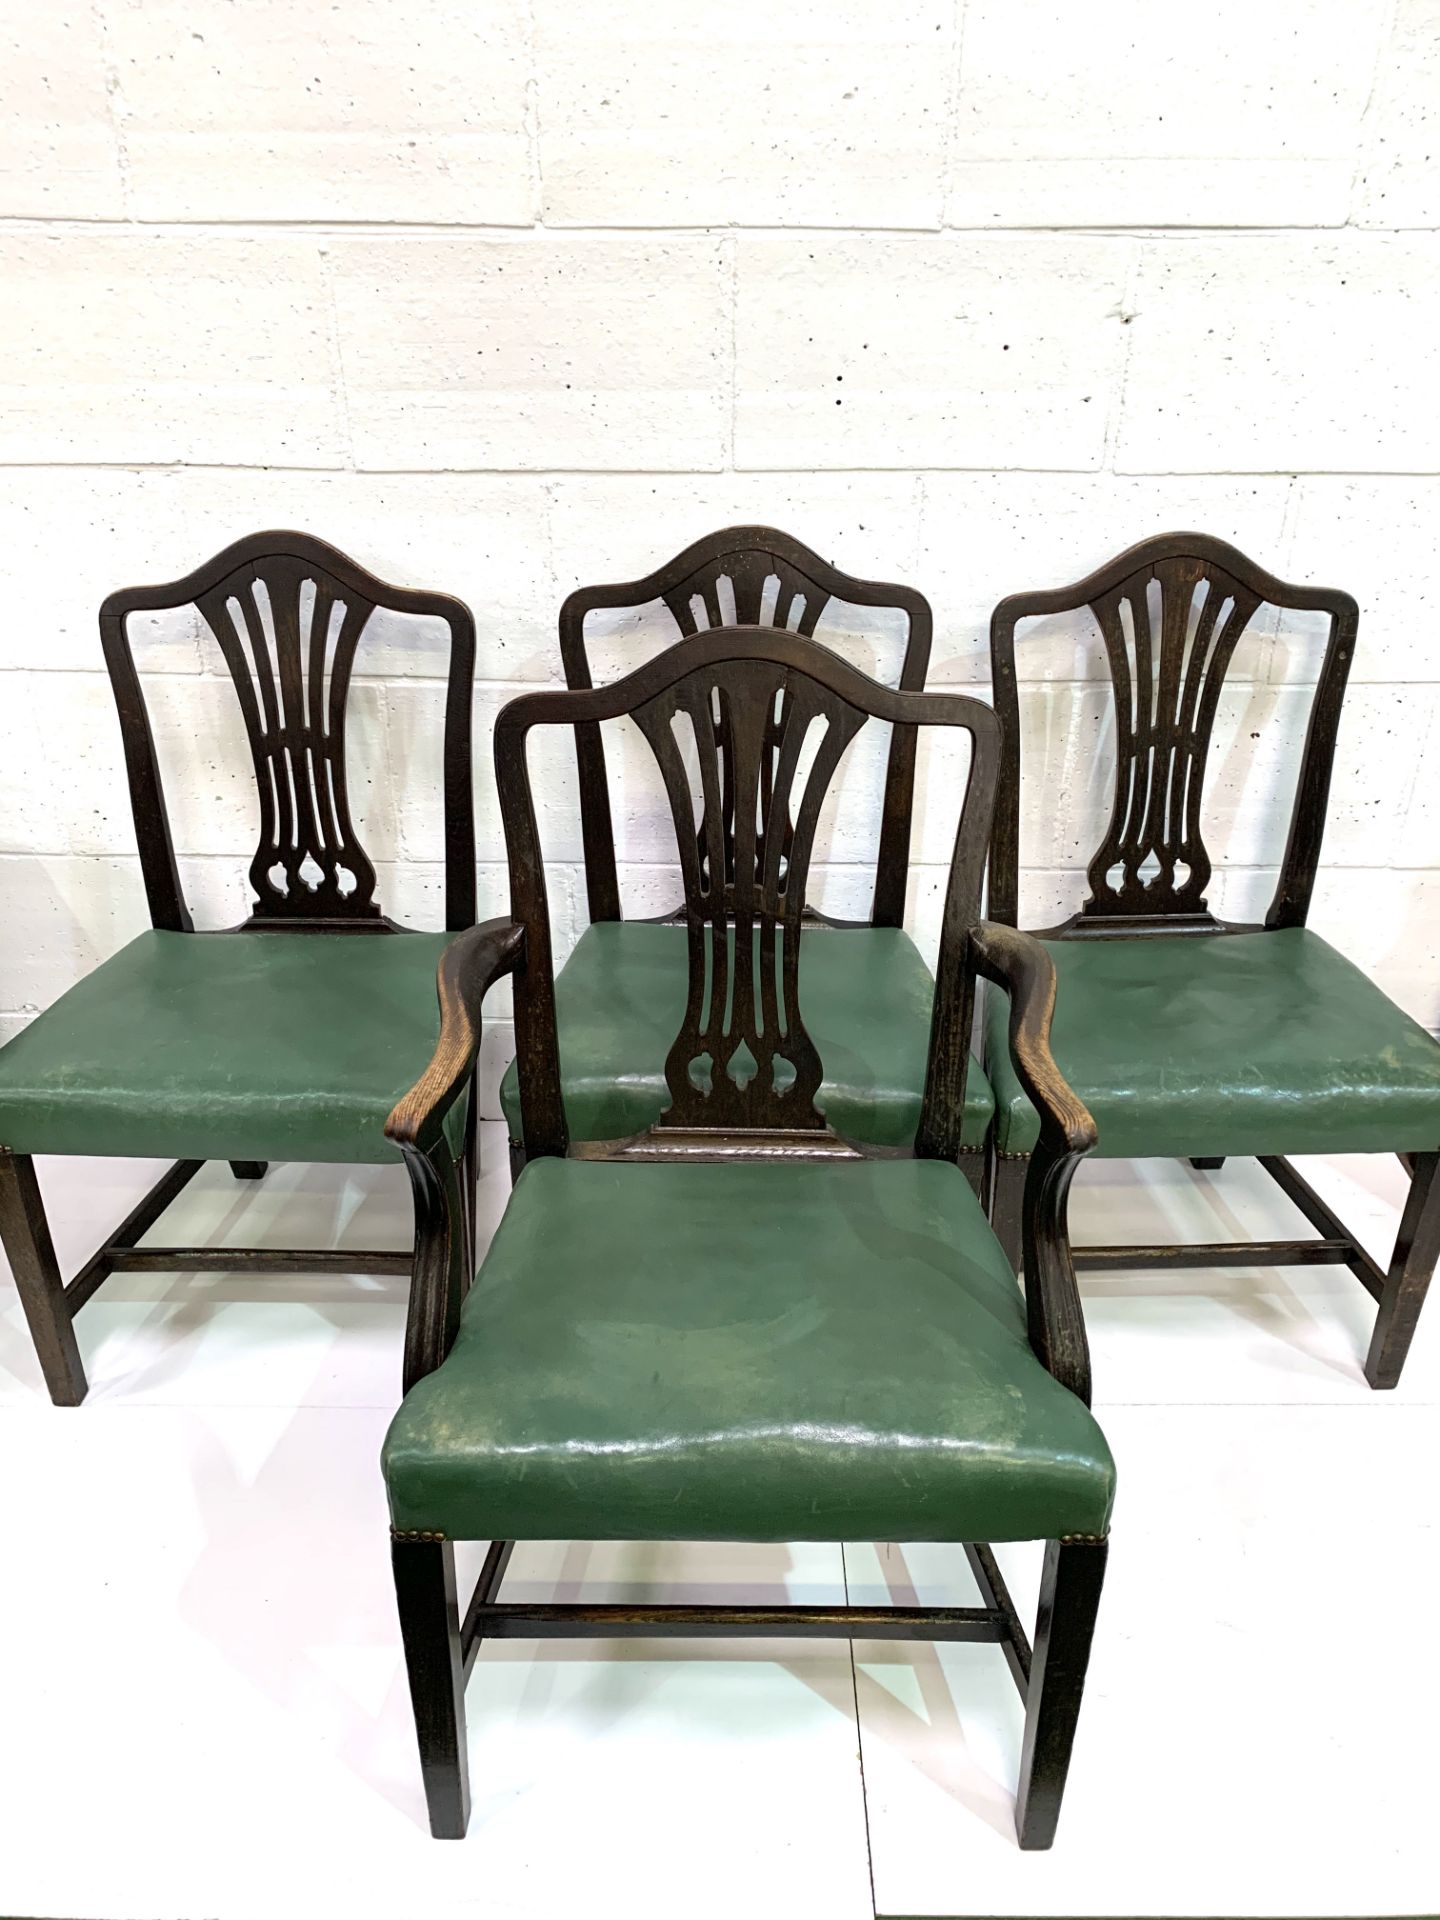 Set of four Victorian dining chairs, three plus one, upholstered in green leather. - Image 5 of 5